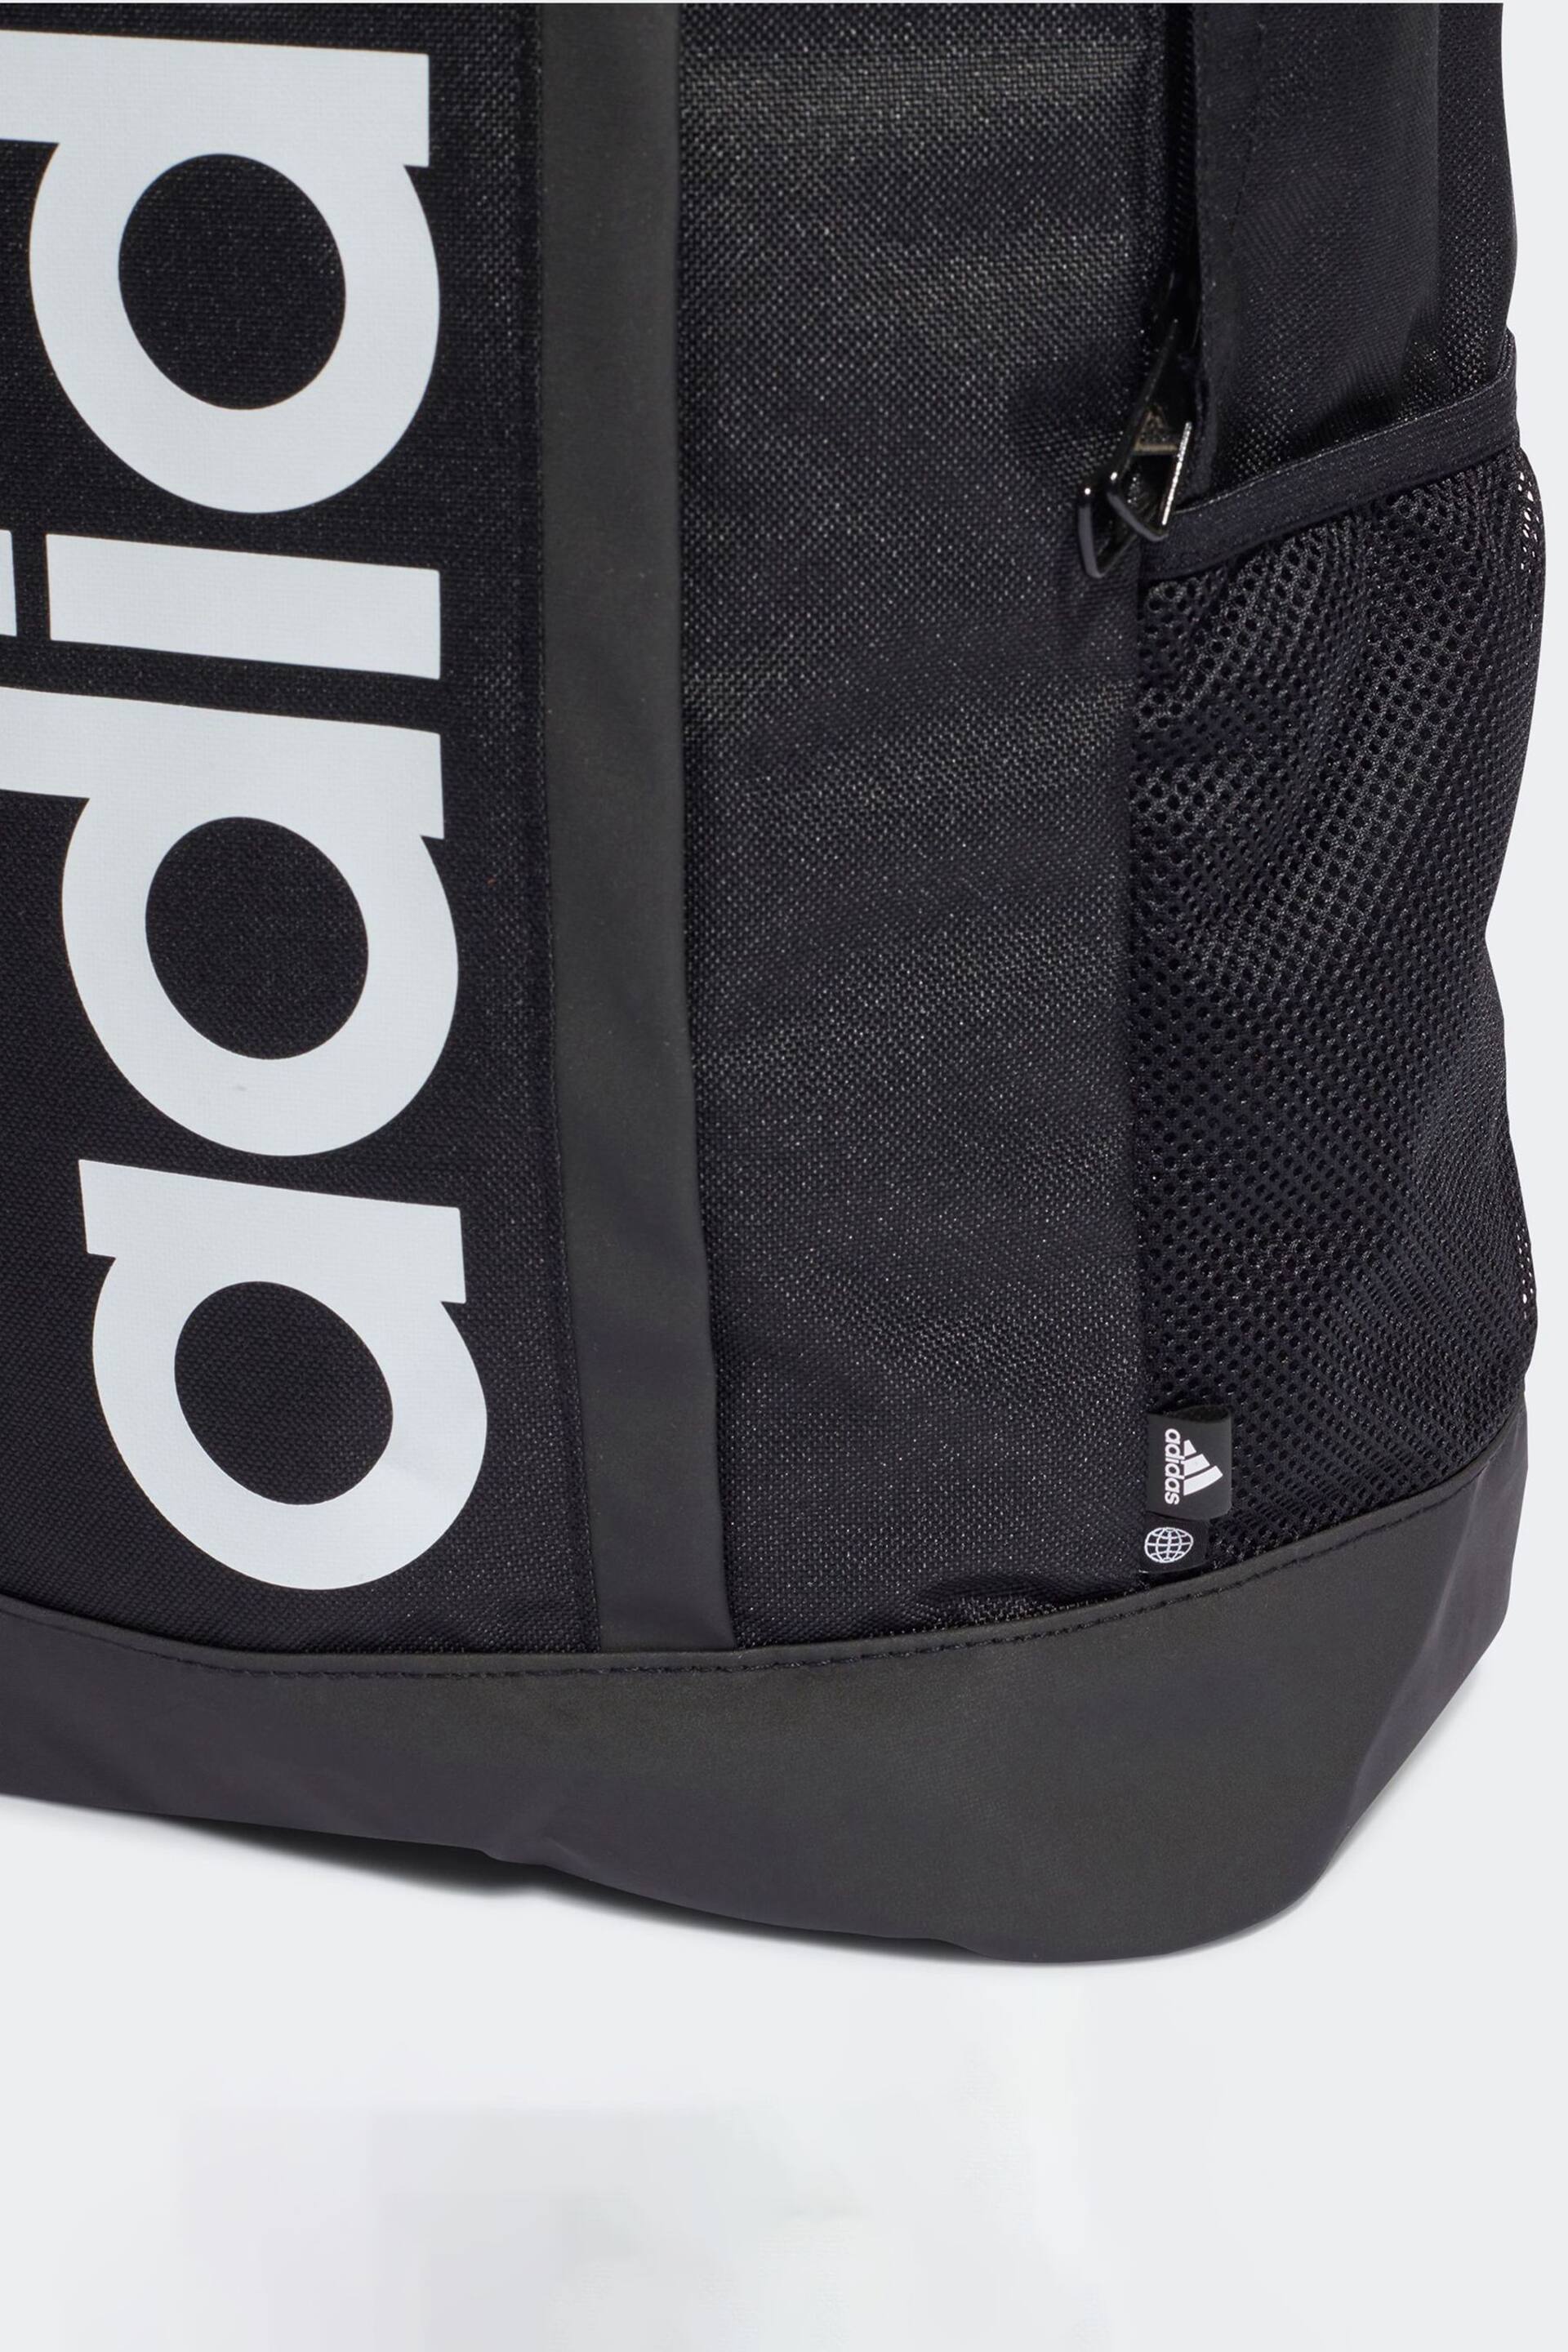 adidas Black Linear Backpack - Image 4 of 5